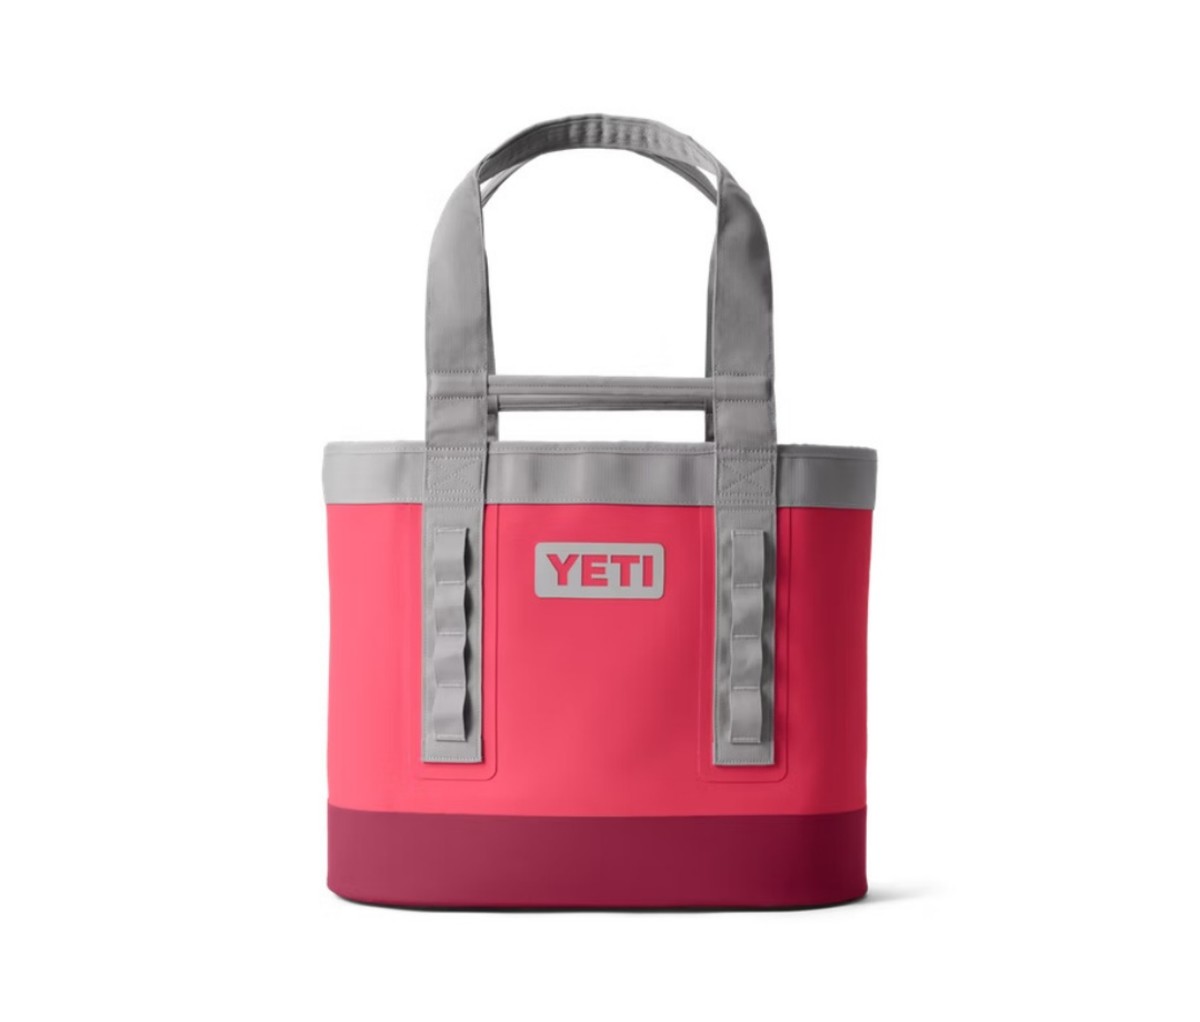 Yeti Camino 35 Carryall in pink against a white background. Mother's Day Gifts.